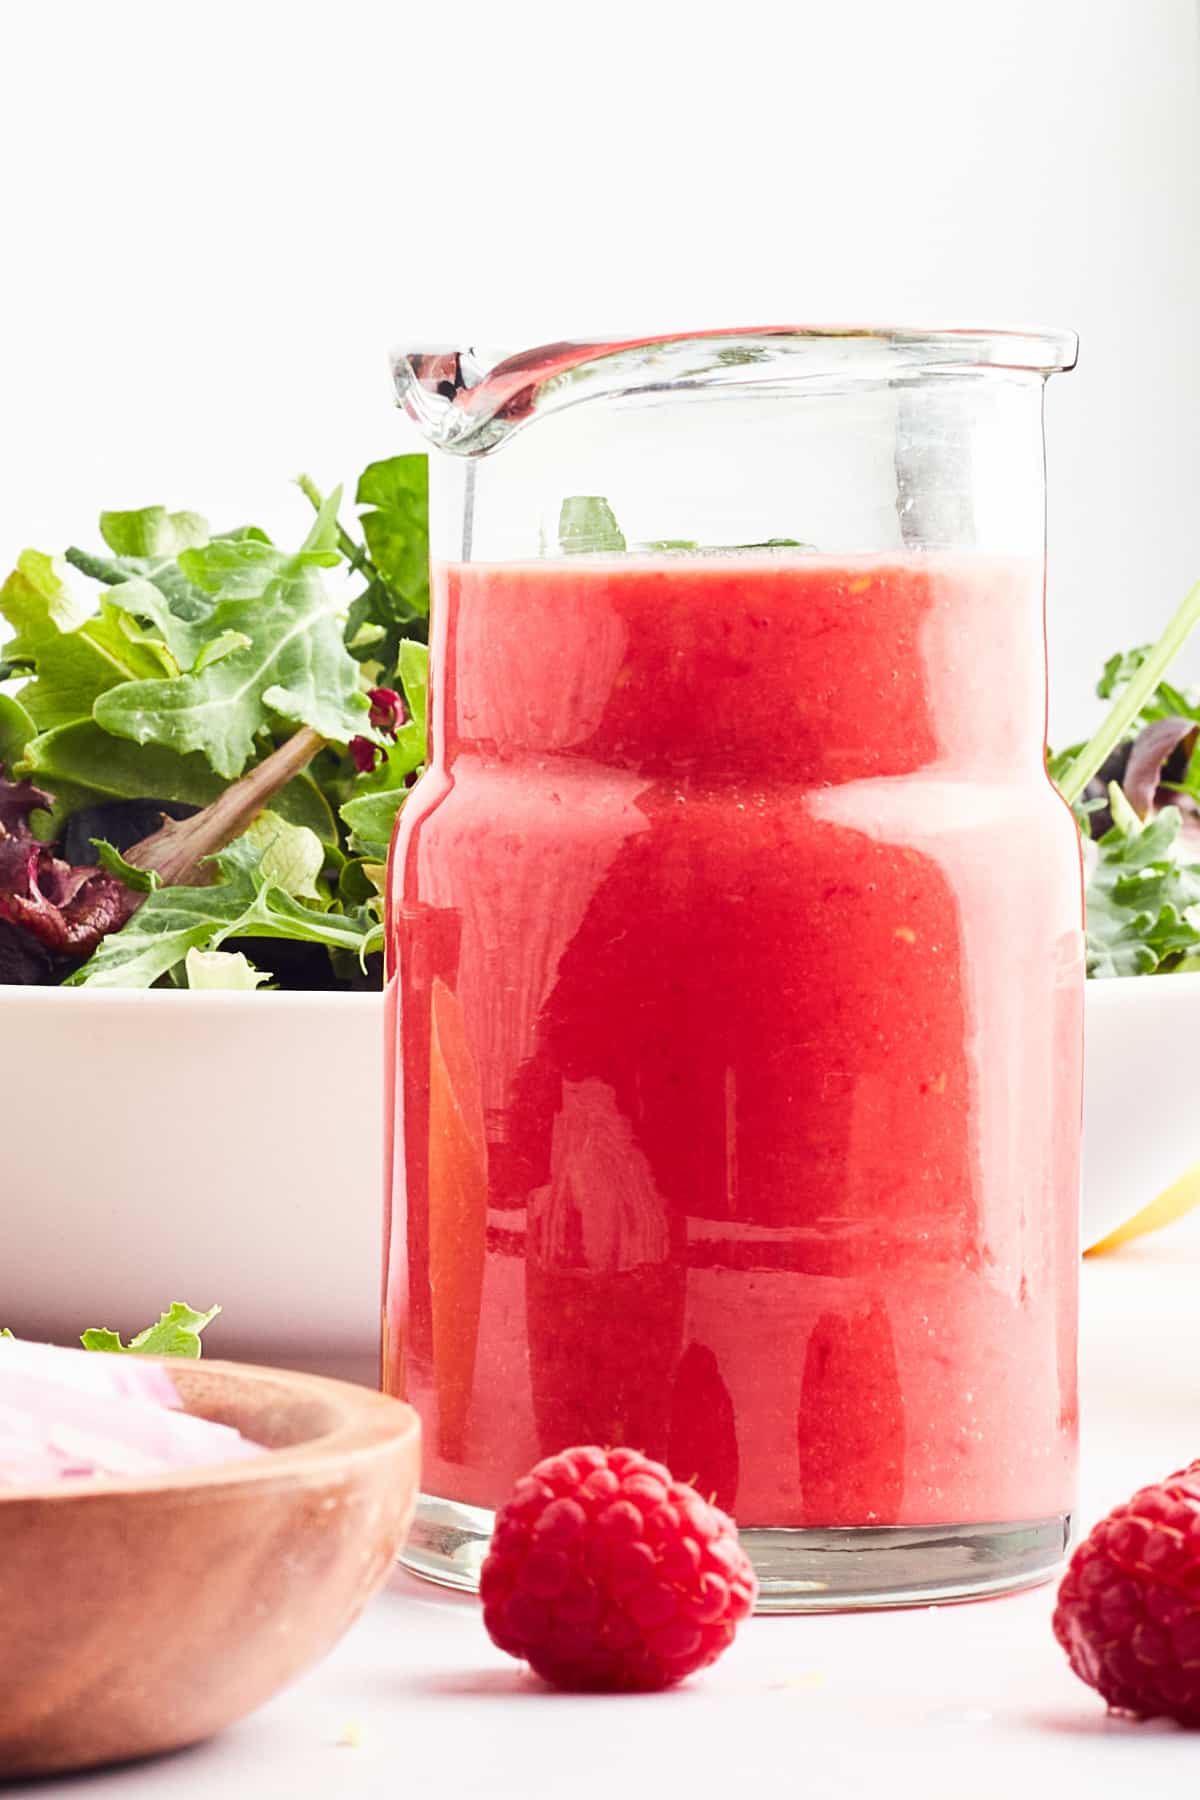 A small glass pitcher of bright red raspberry vinaigrette sits in front of a large bowl of salad greens.